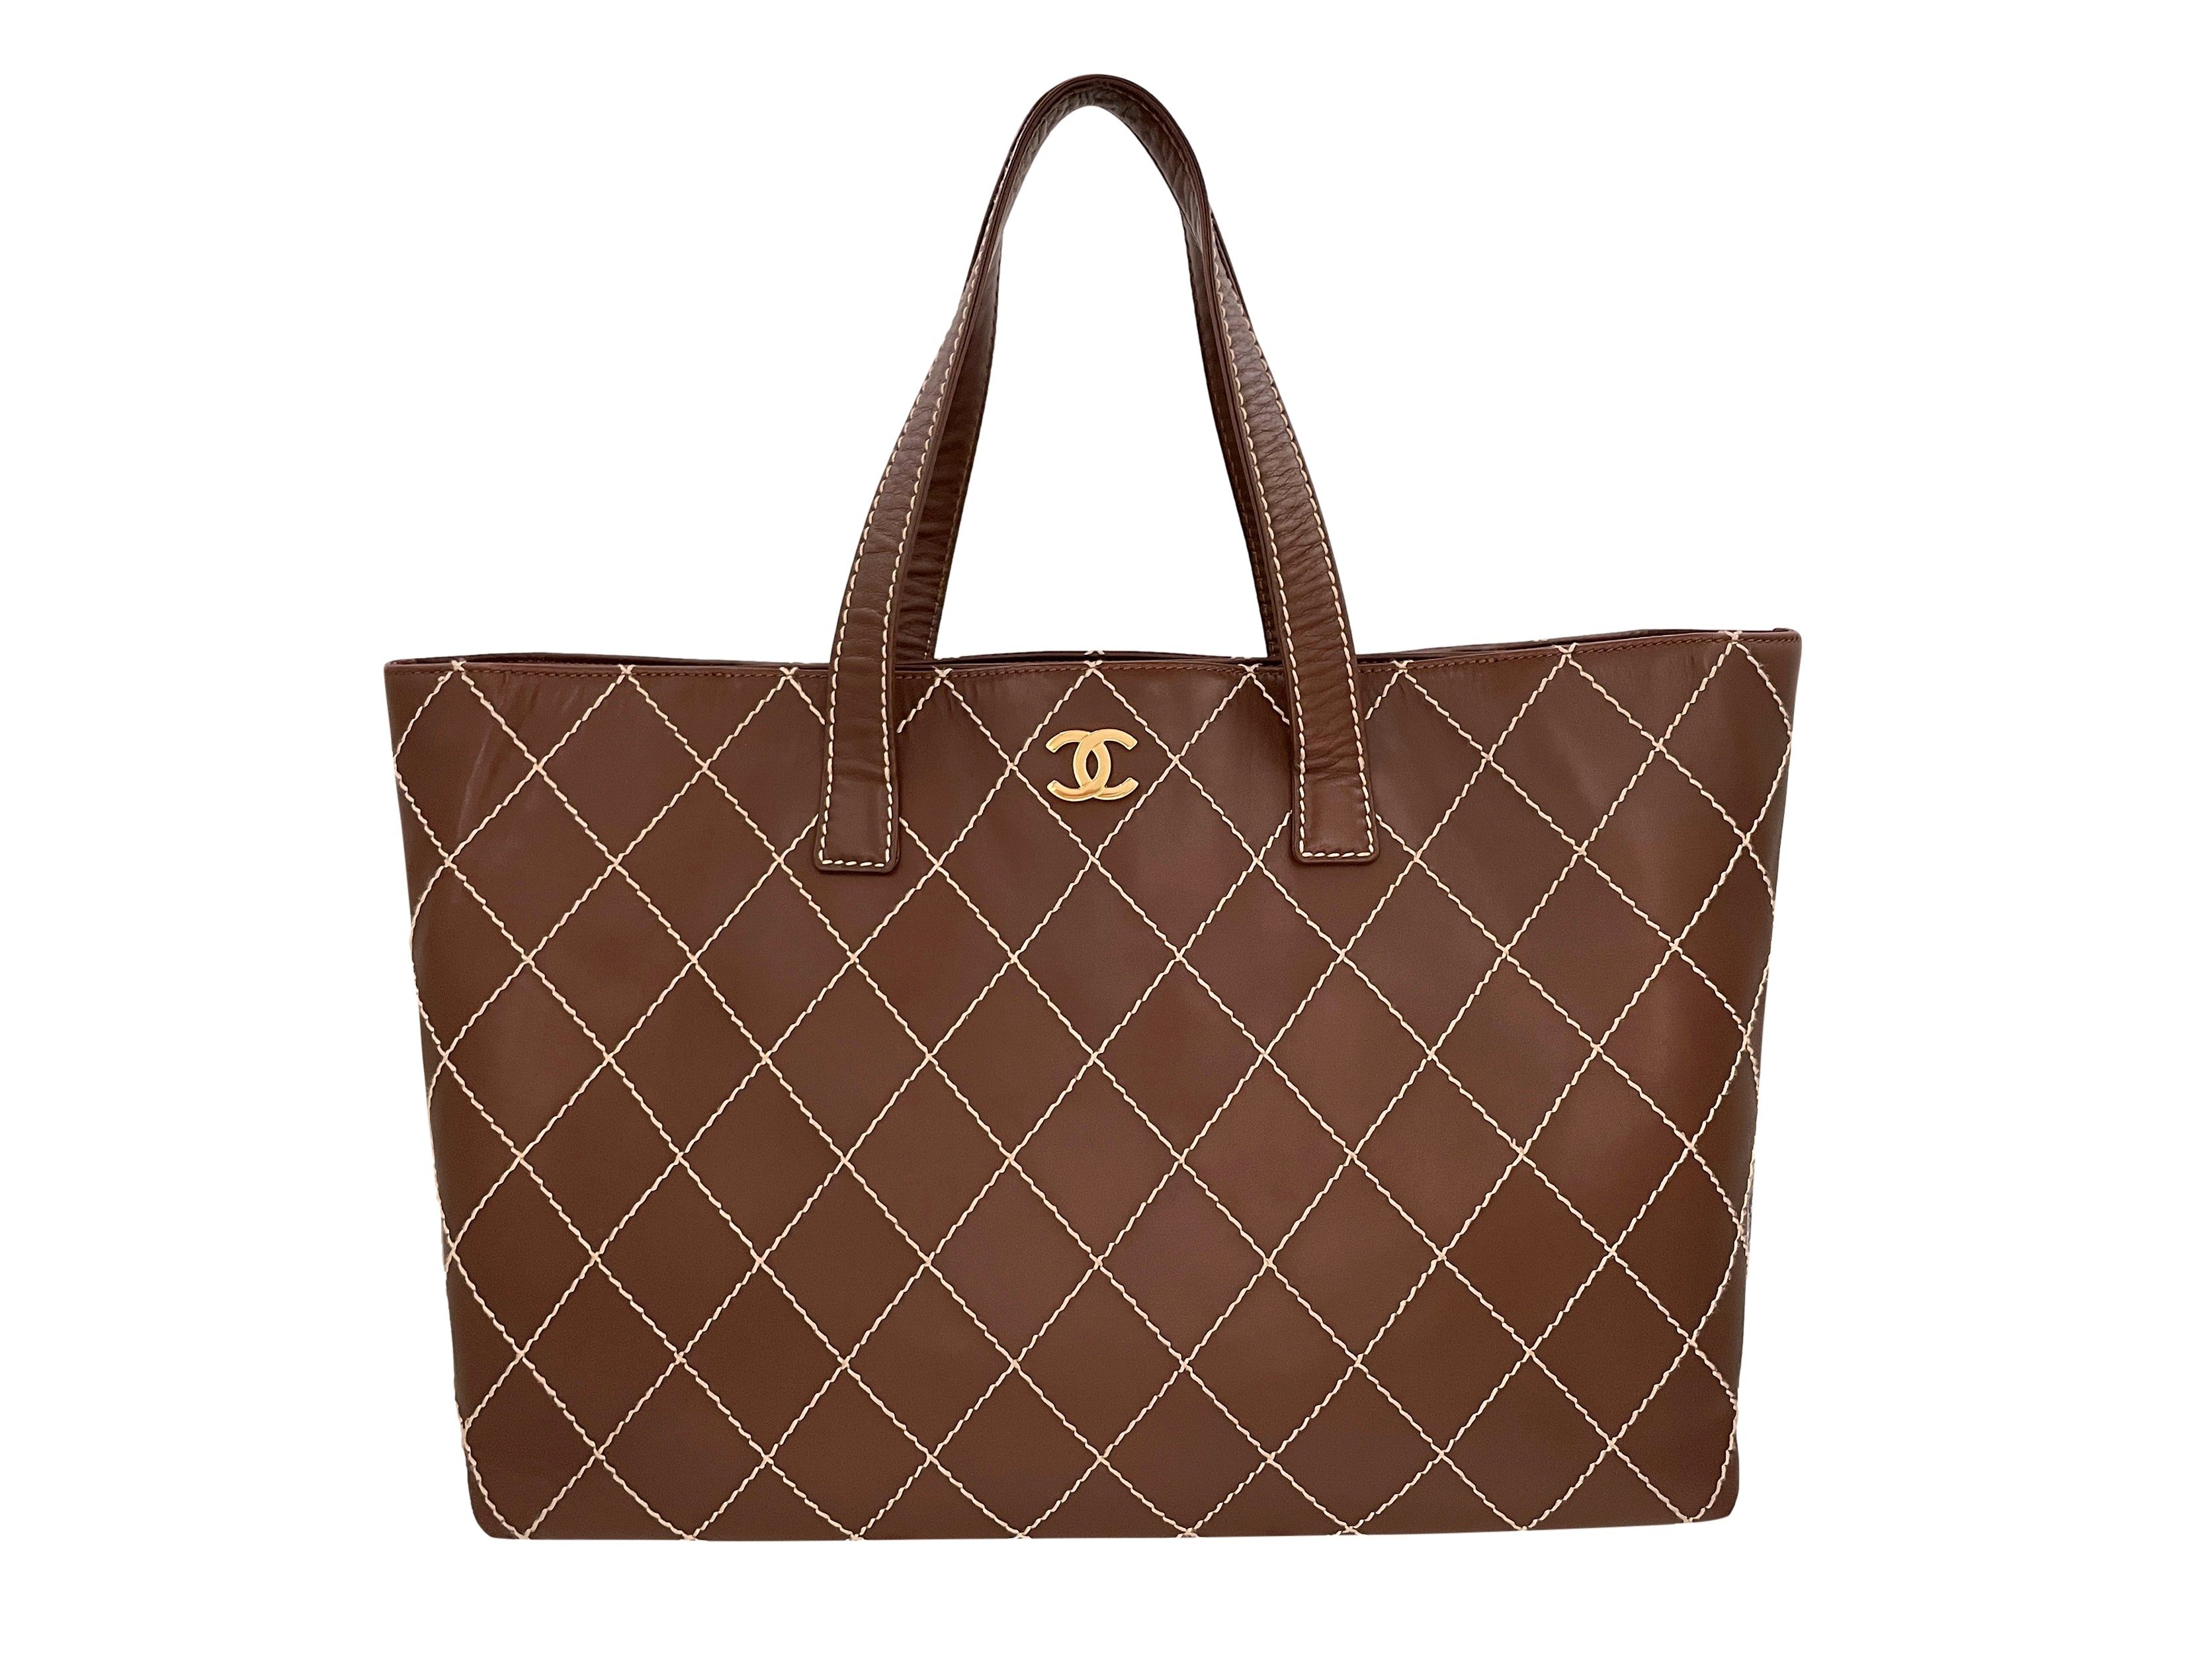 Chanel Wild Stitch Handbag Leather Bordeaux Digits In The 6Th Series 5541.  